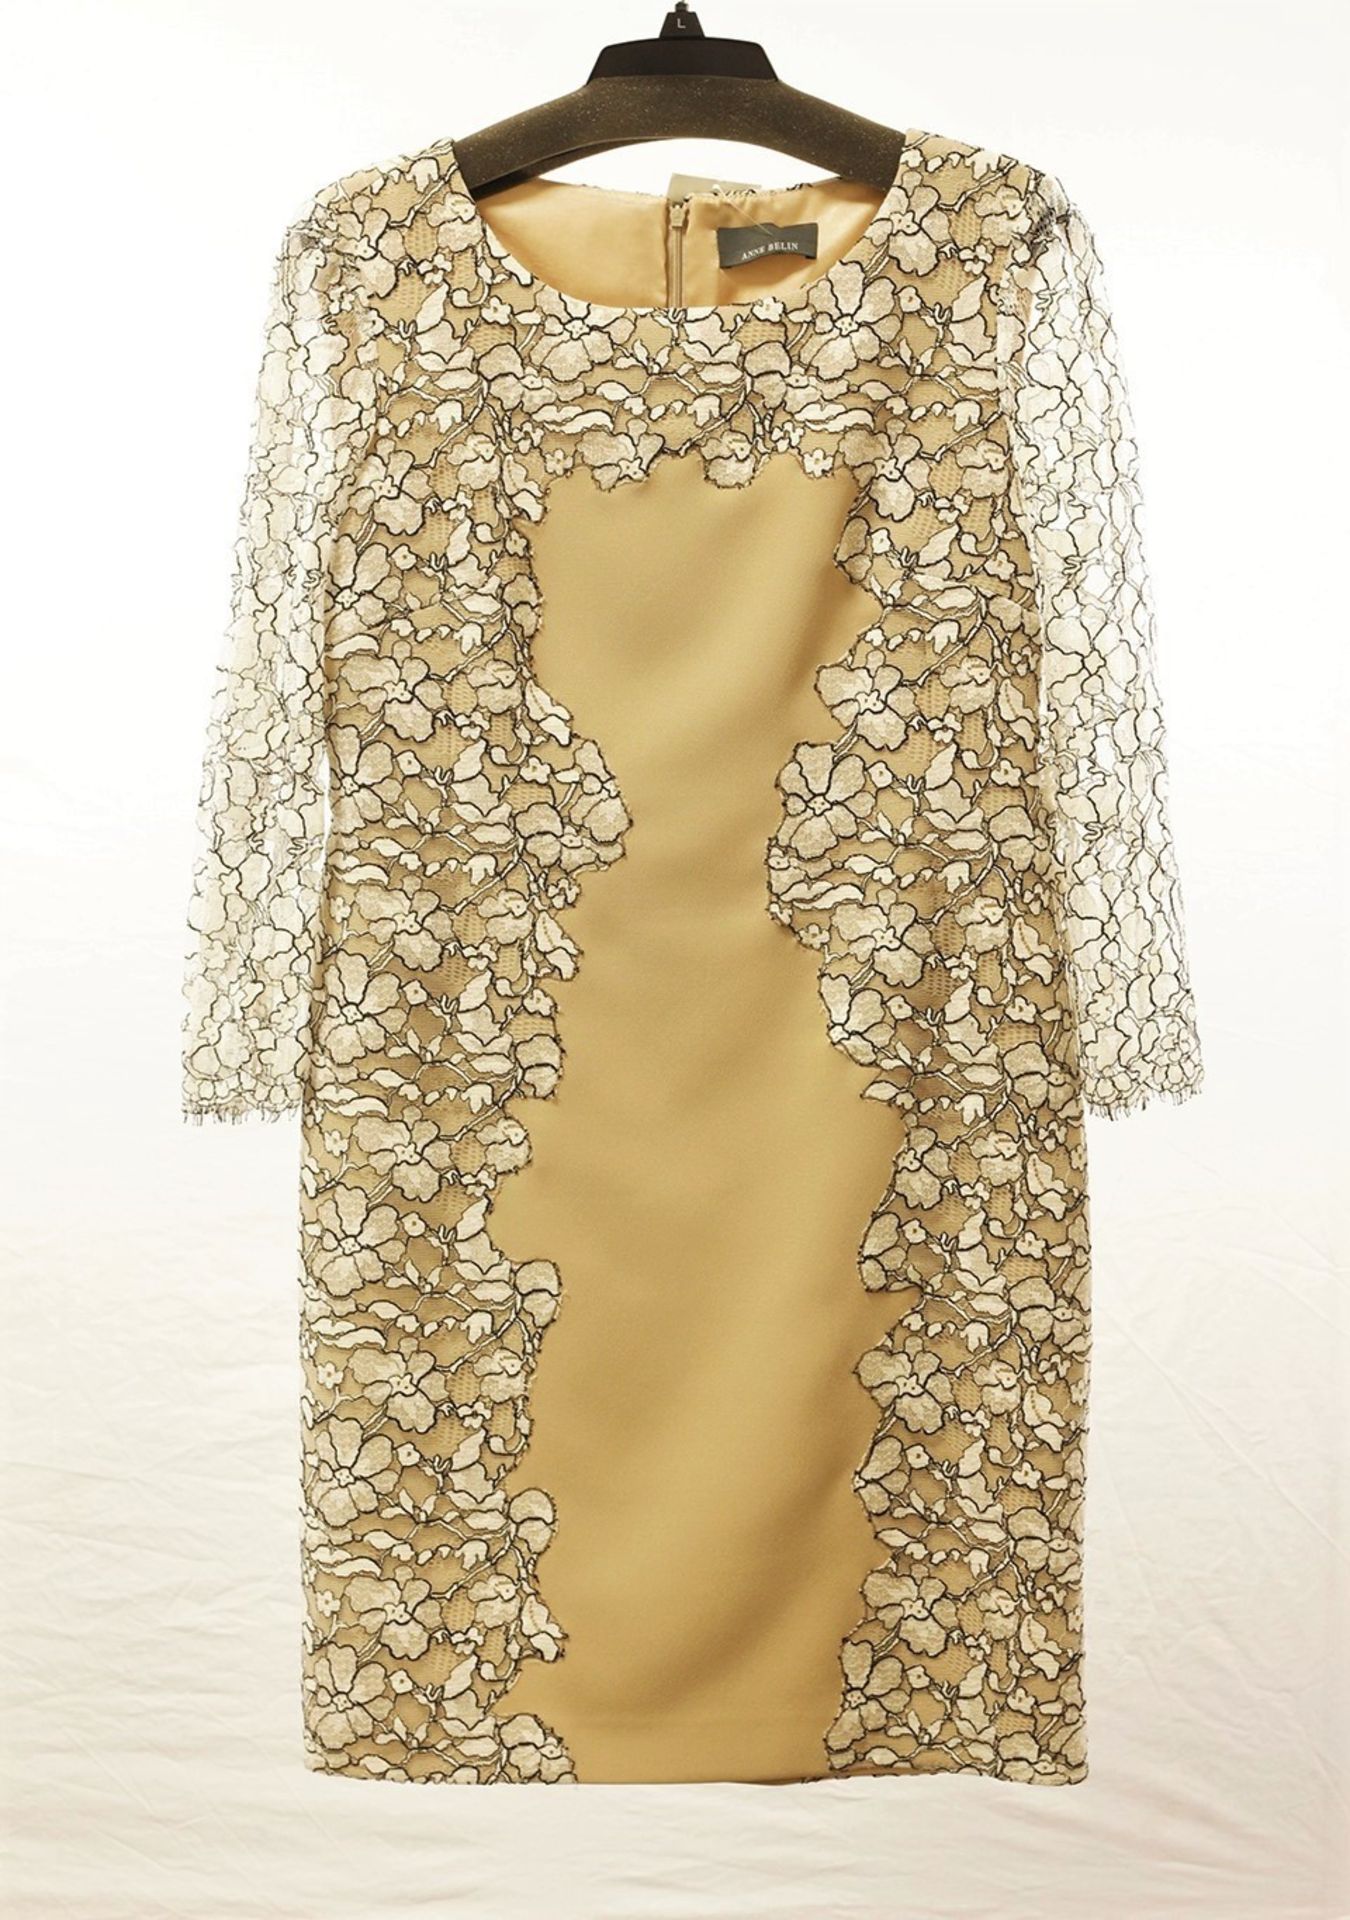 1 x Anne Belin Beige Dress - Size: 16 - Material: 100% Polyester - From a High End Clothing Boutique